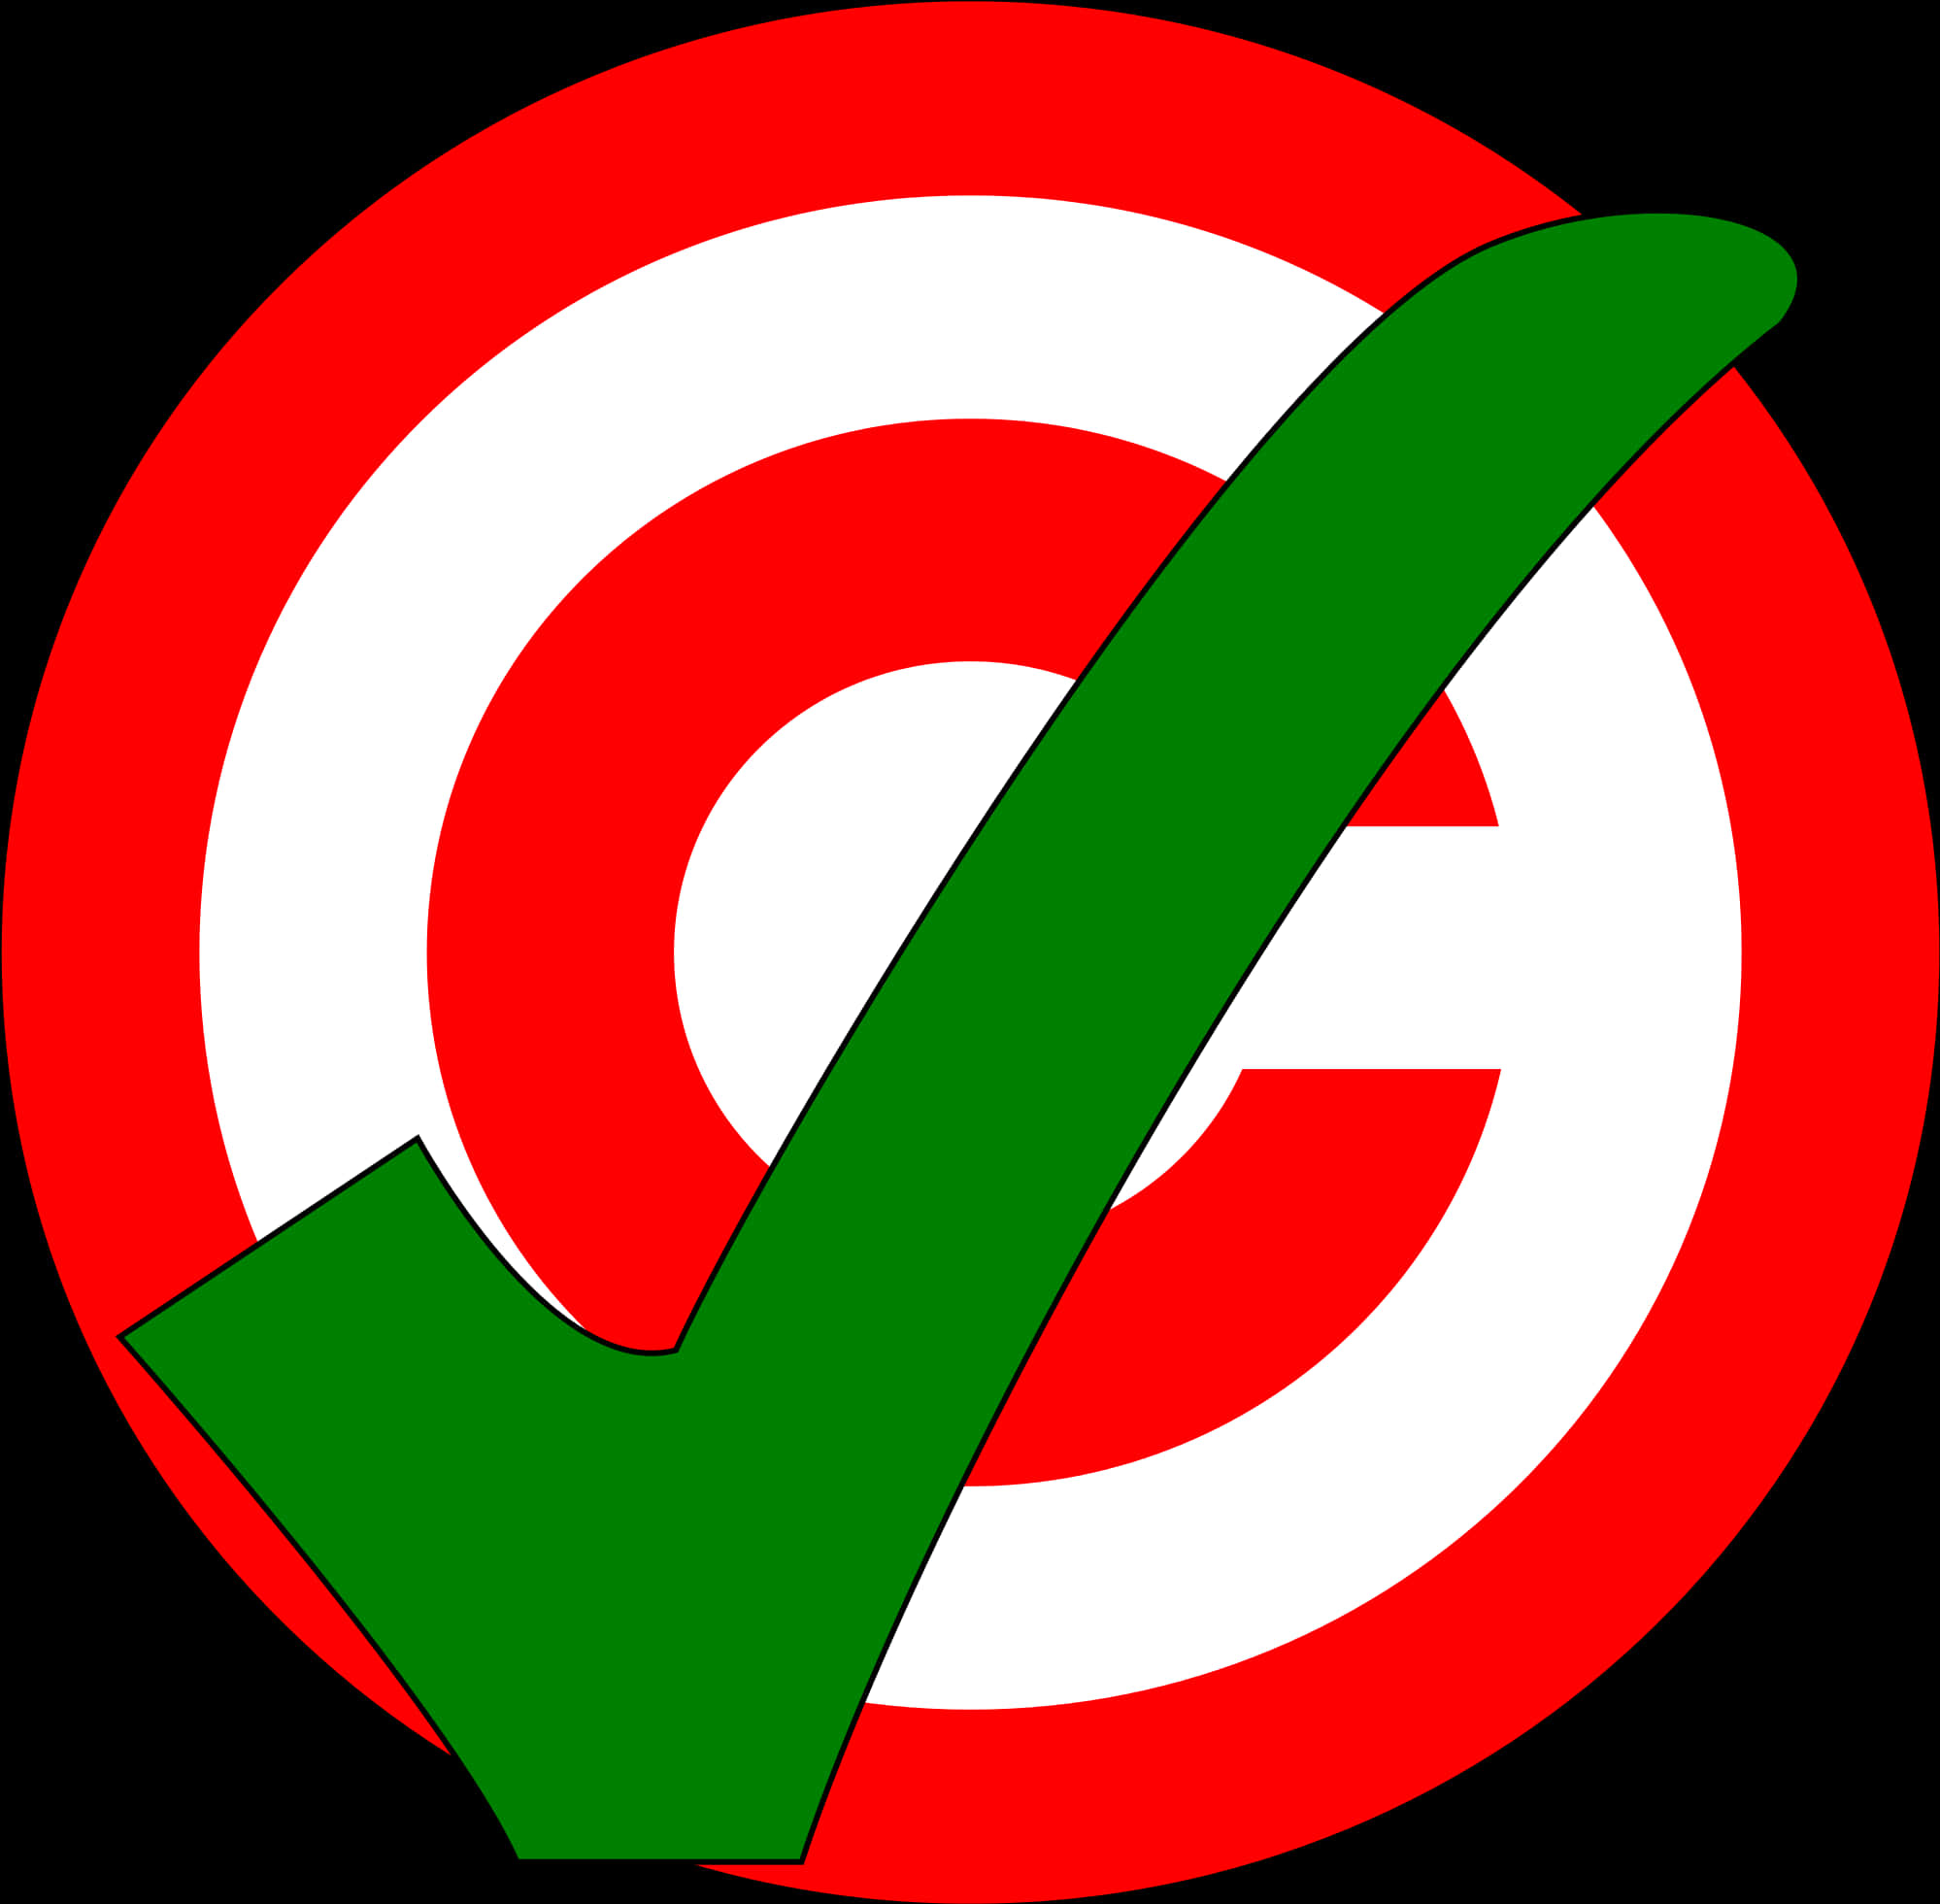 A Green Check Mark On A Red And White Target